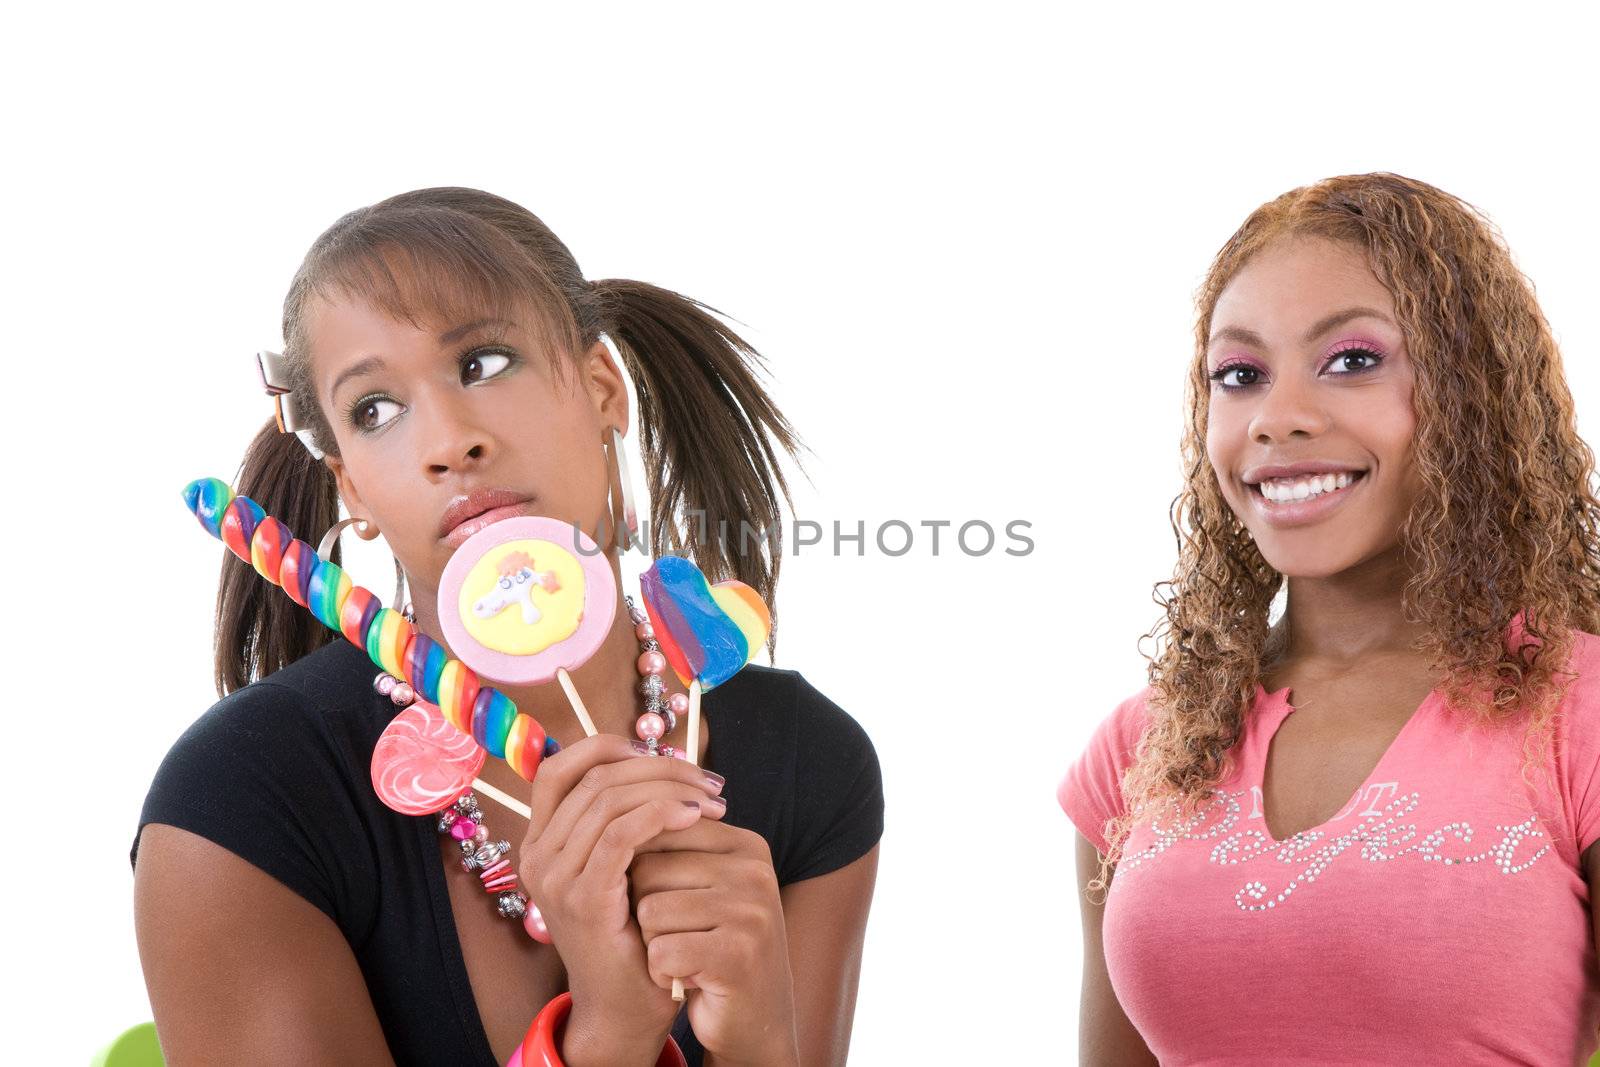 Two pretty black girls sitting next to each other; one is having candy but looking very unhappy, while the other is beaming